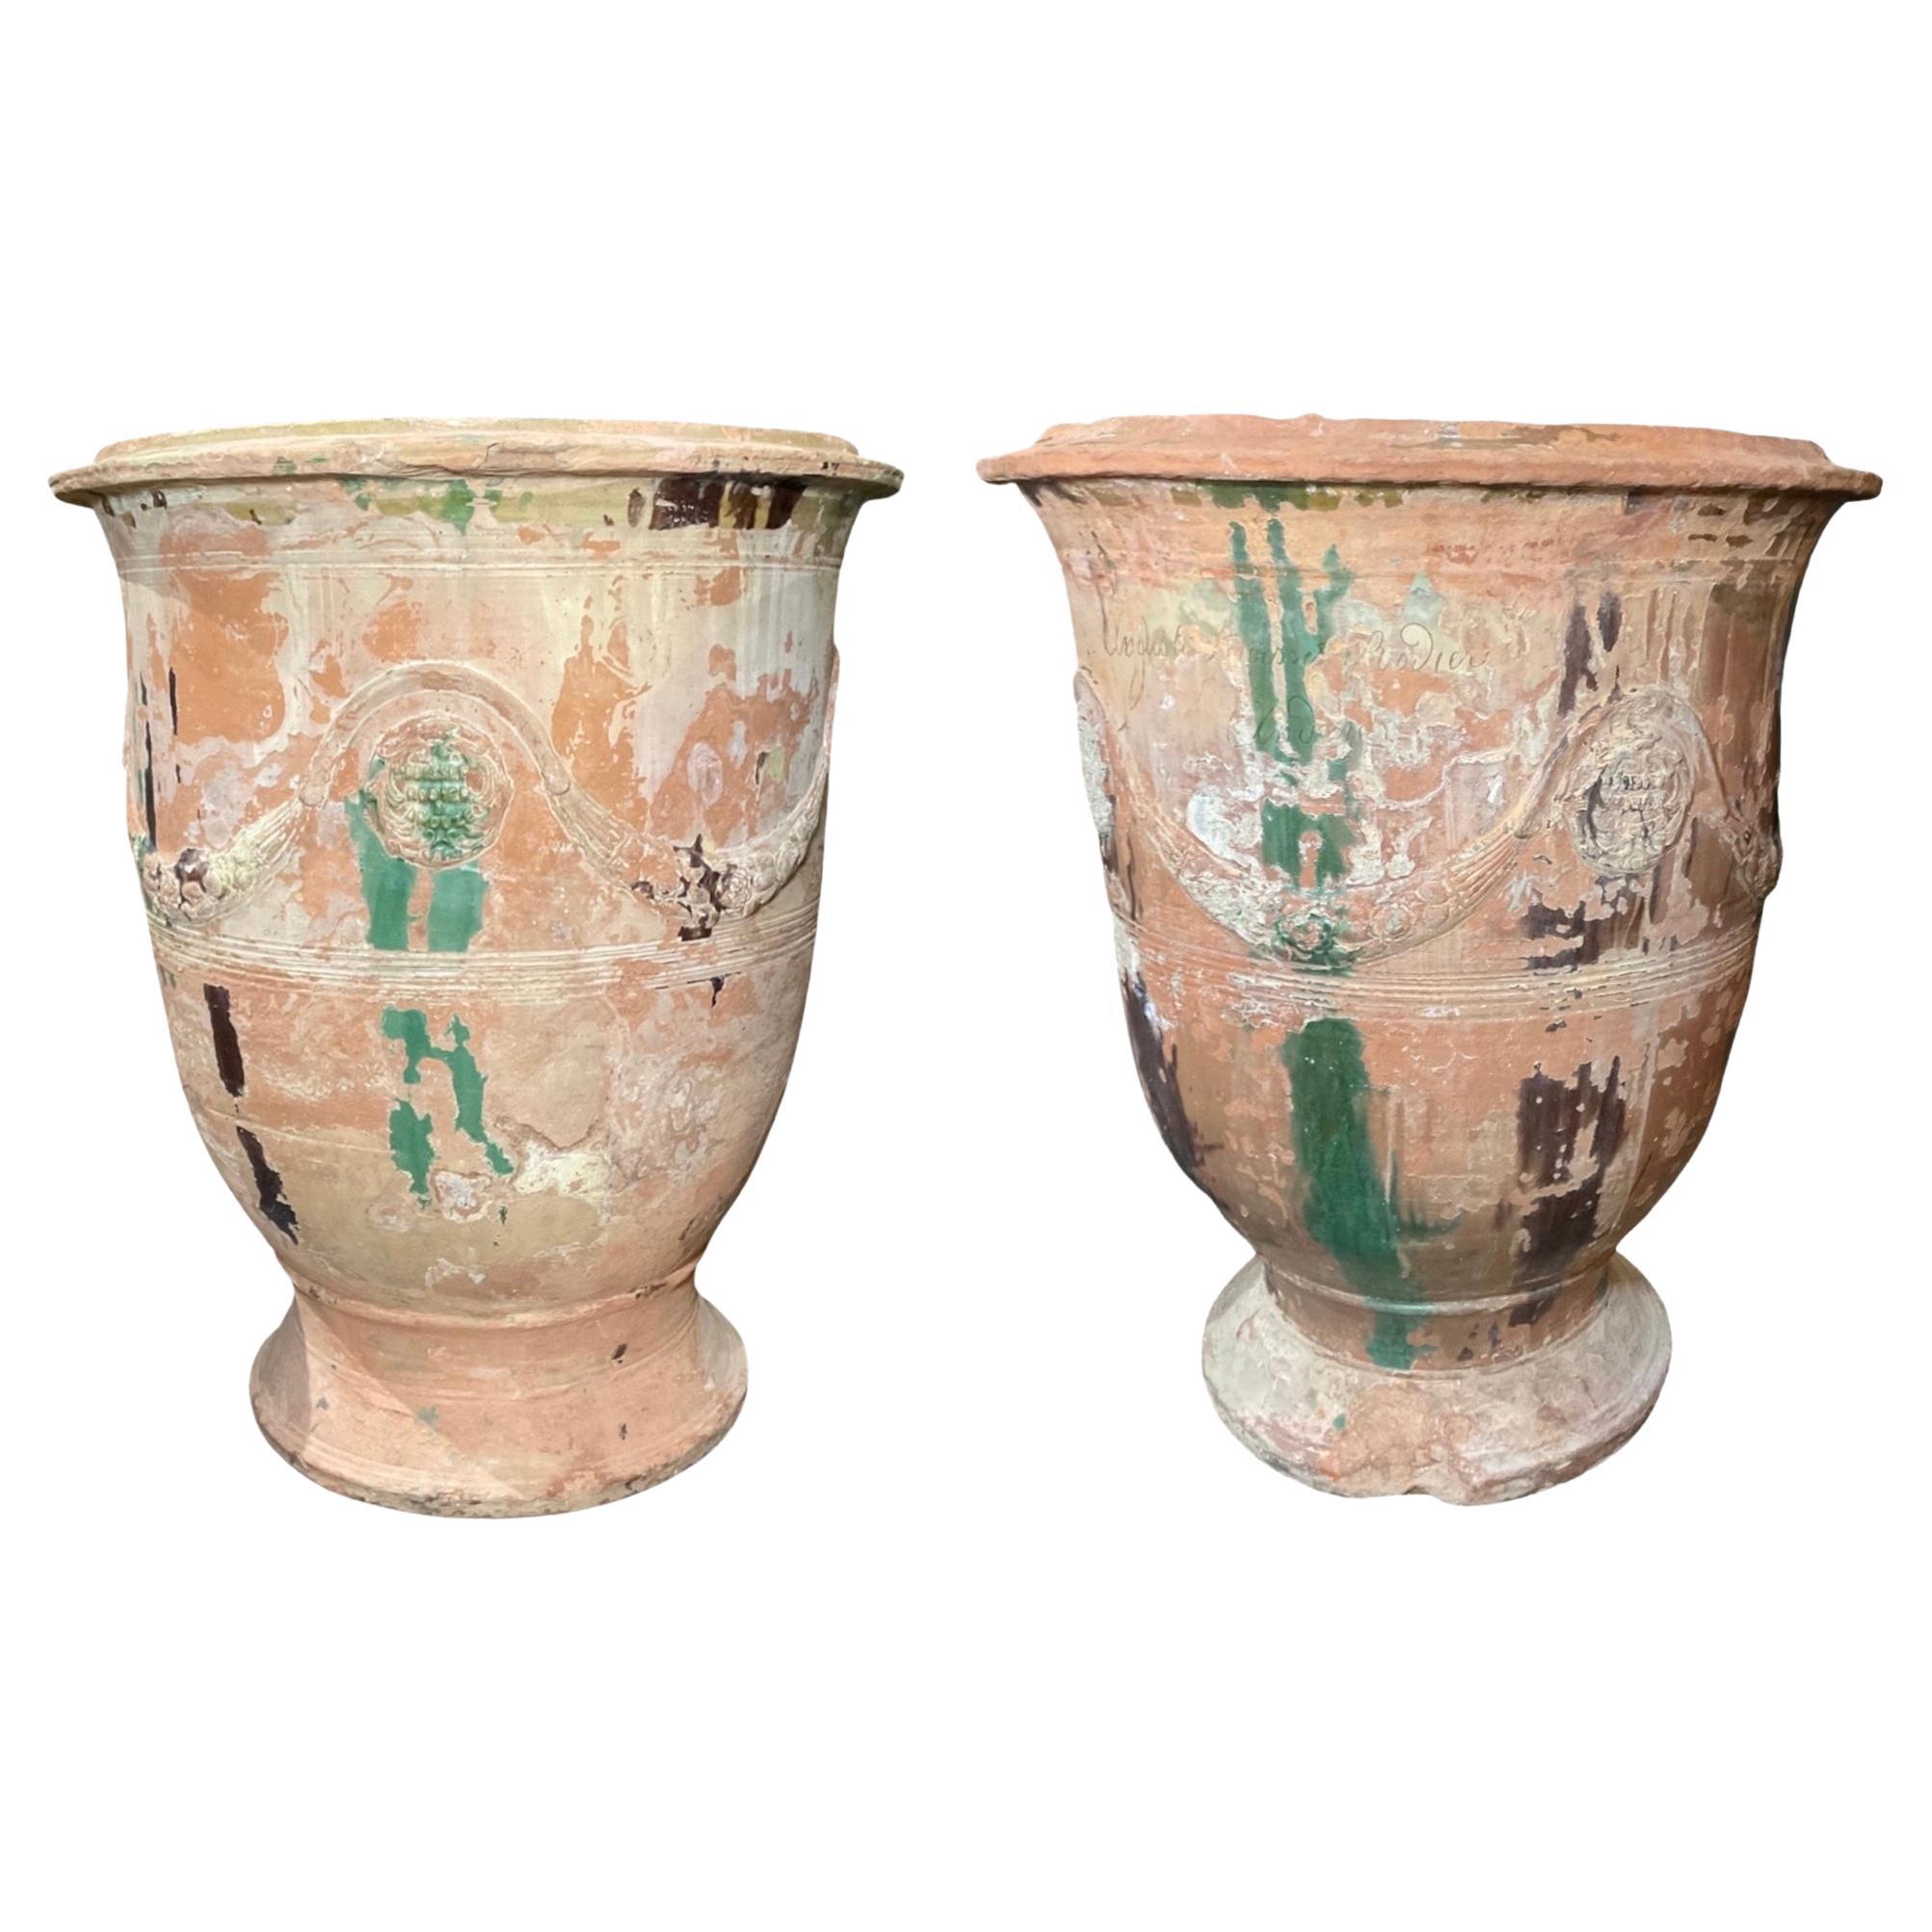 French Terracotta Anduze Planters